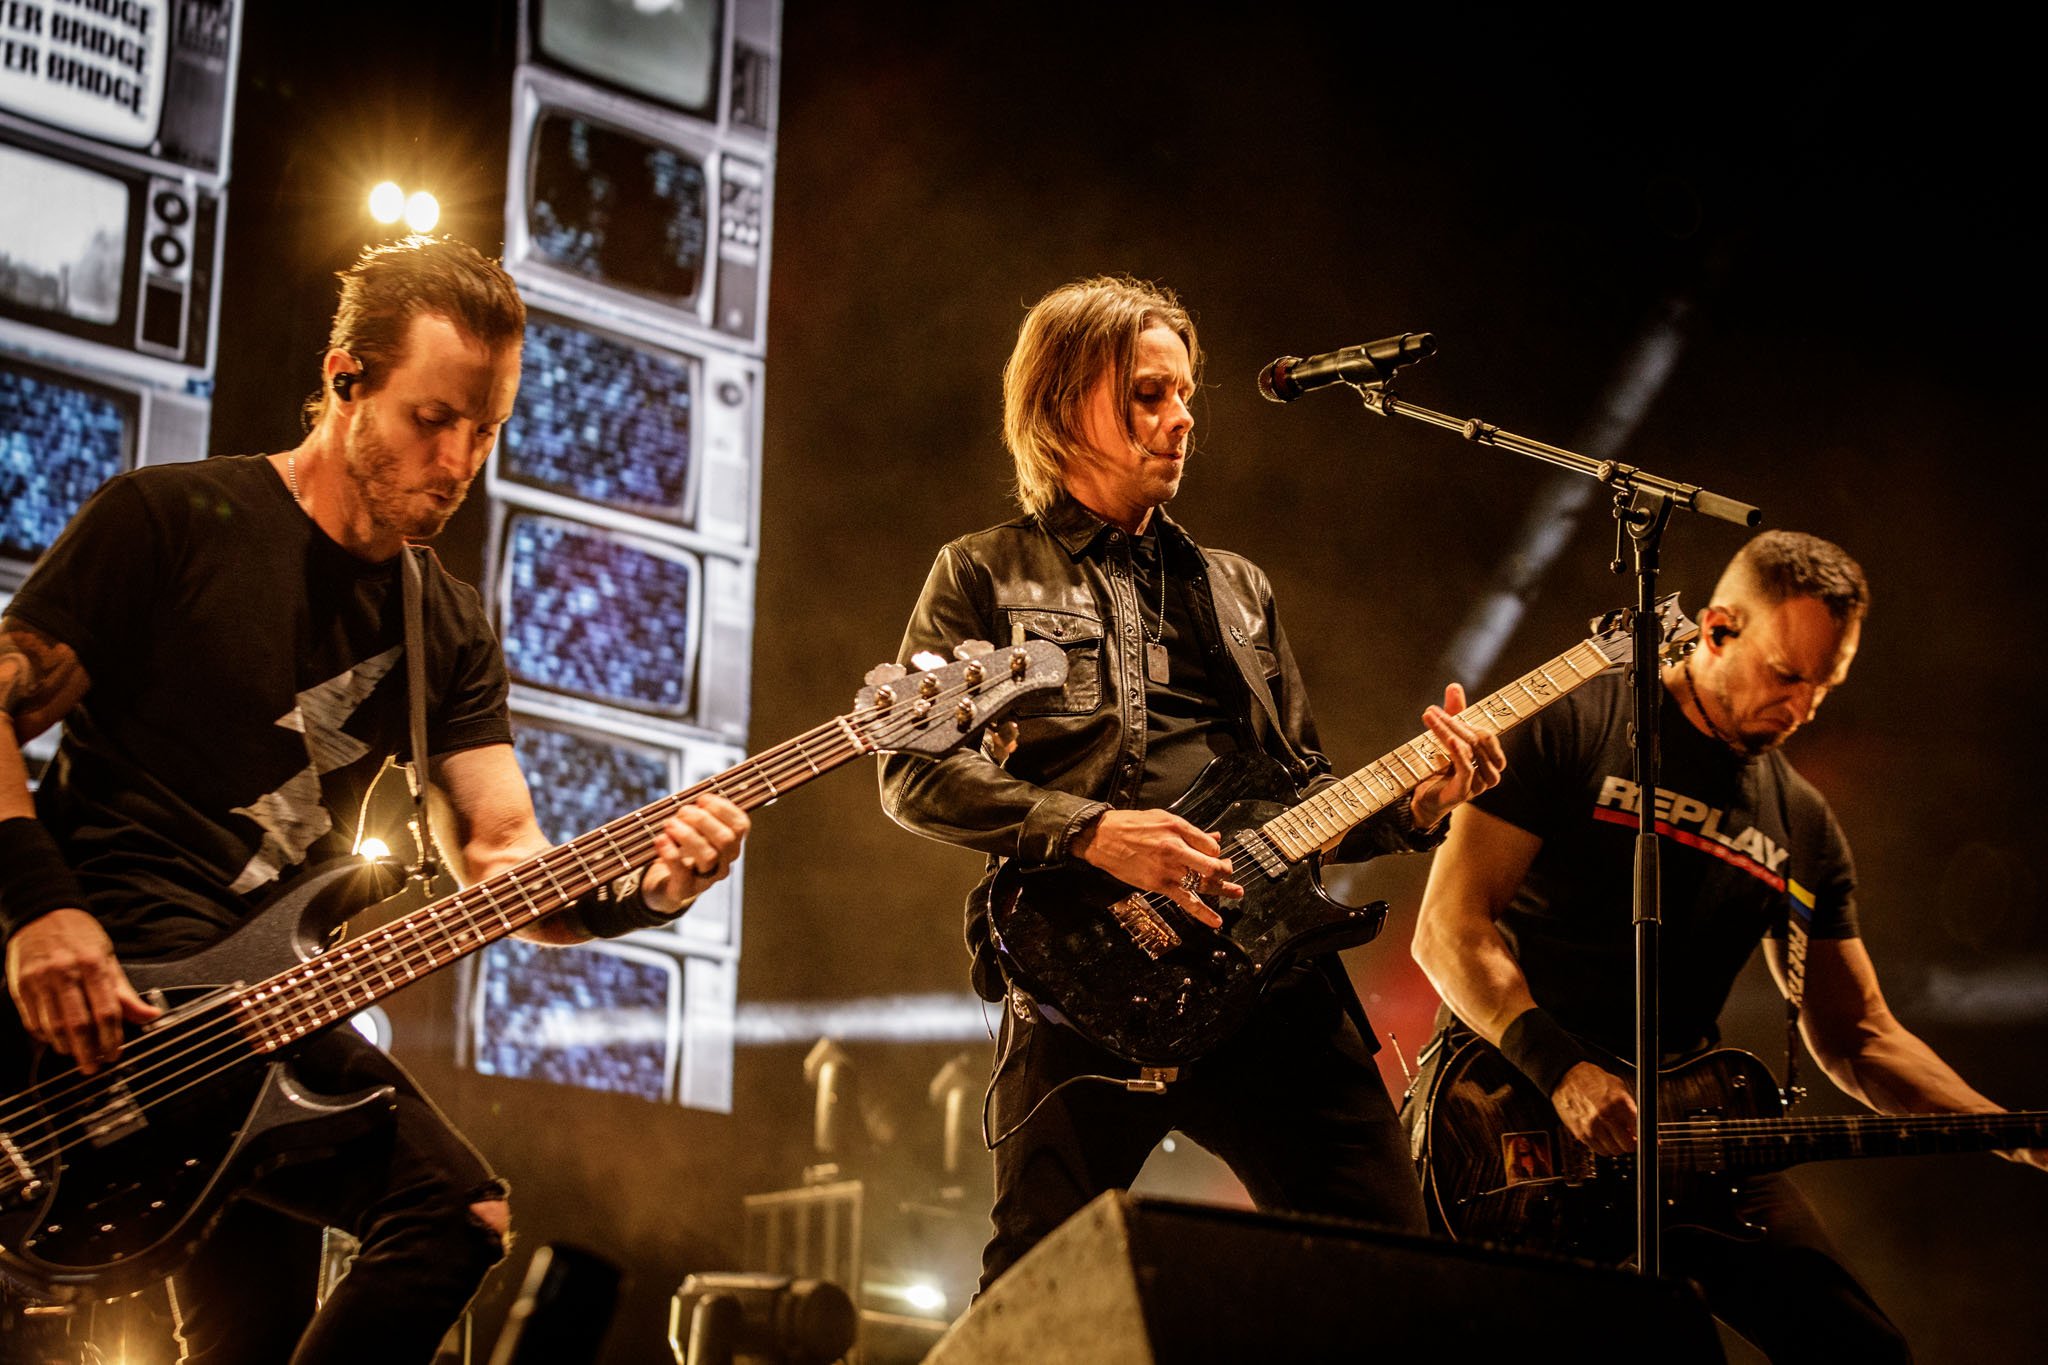 Alter Bridge at the AO Arena in Manchester on December 9th 2022 